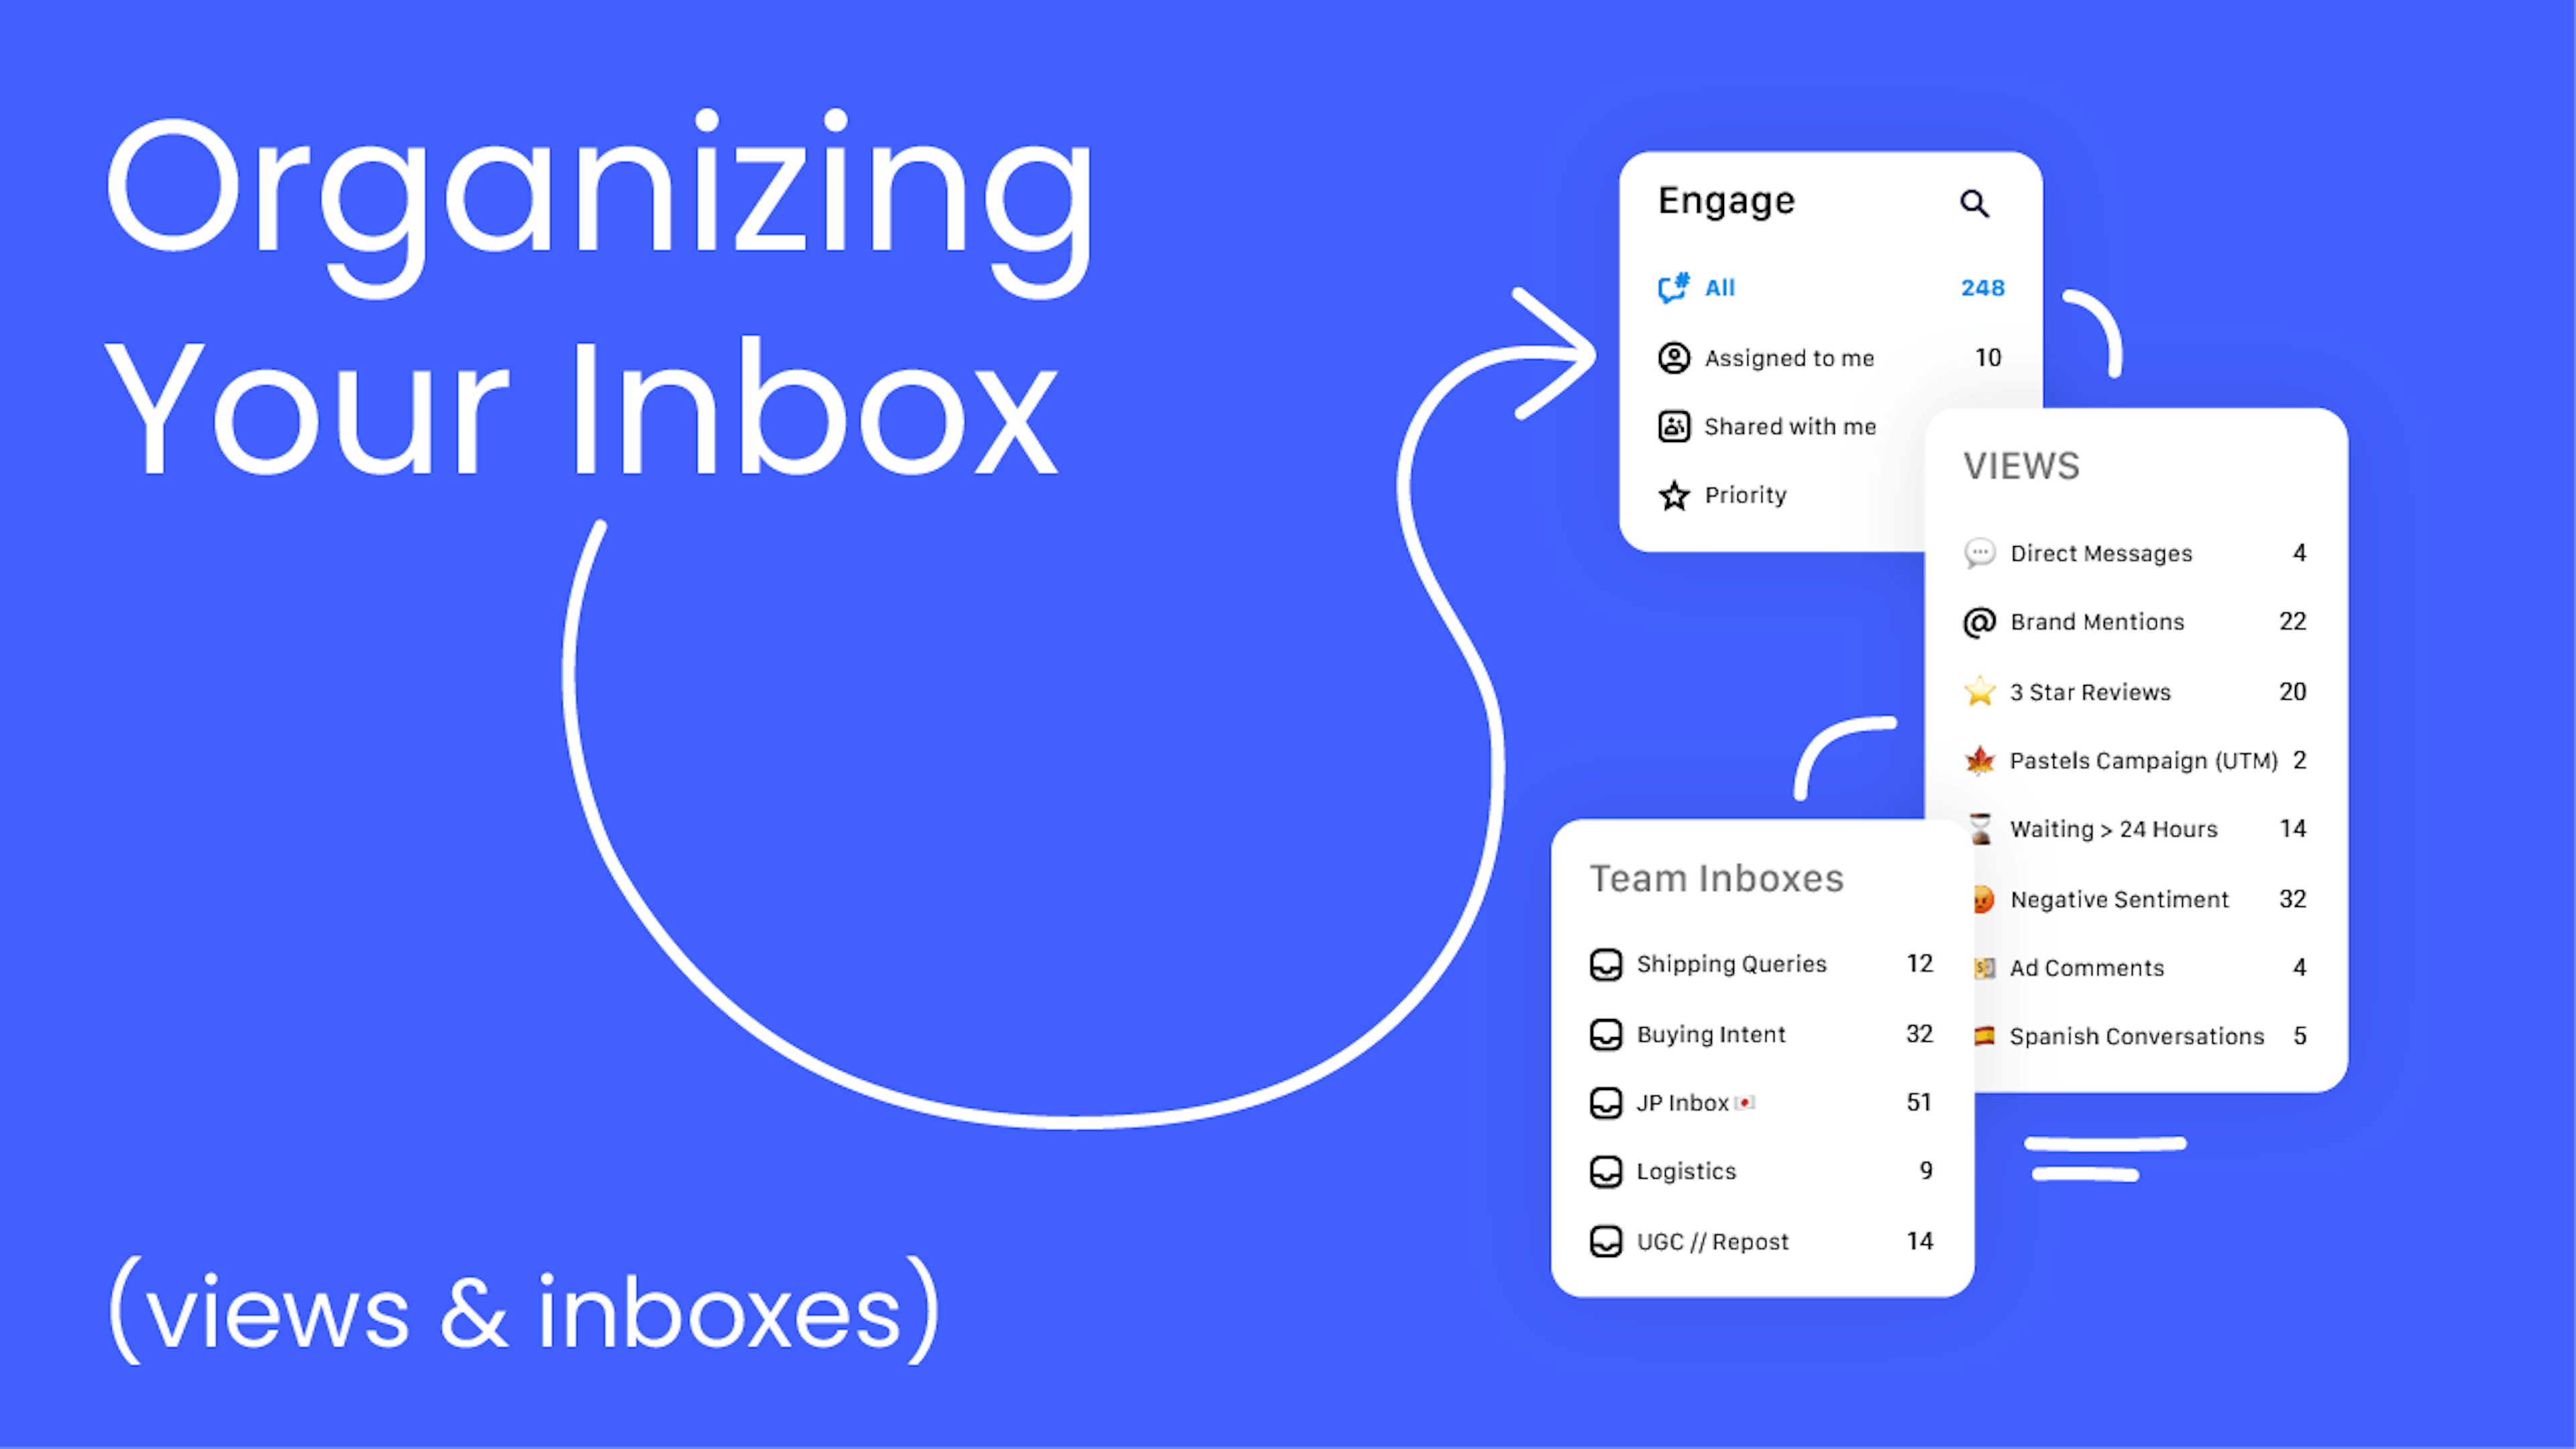 How to organize Engage Inbox